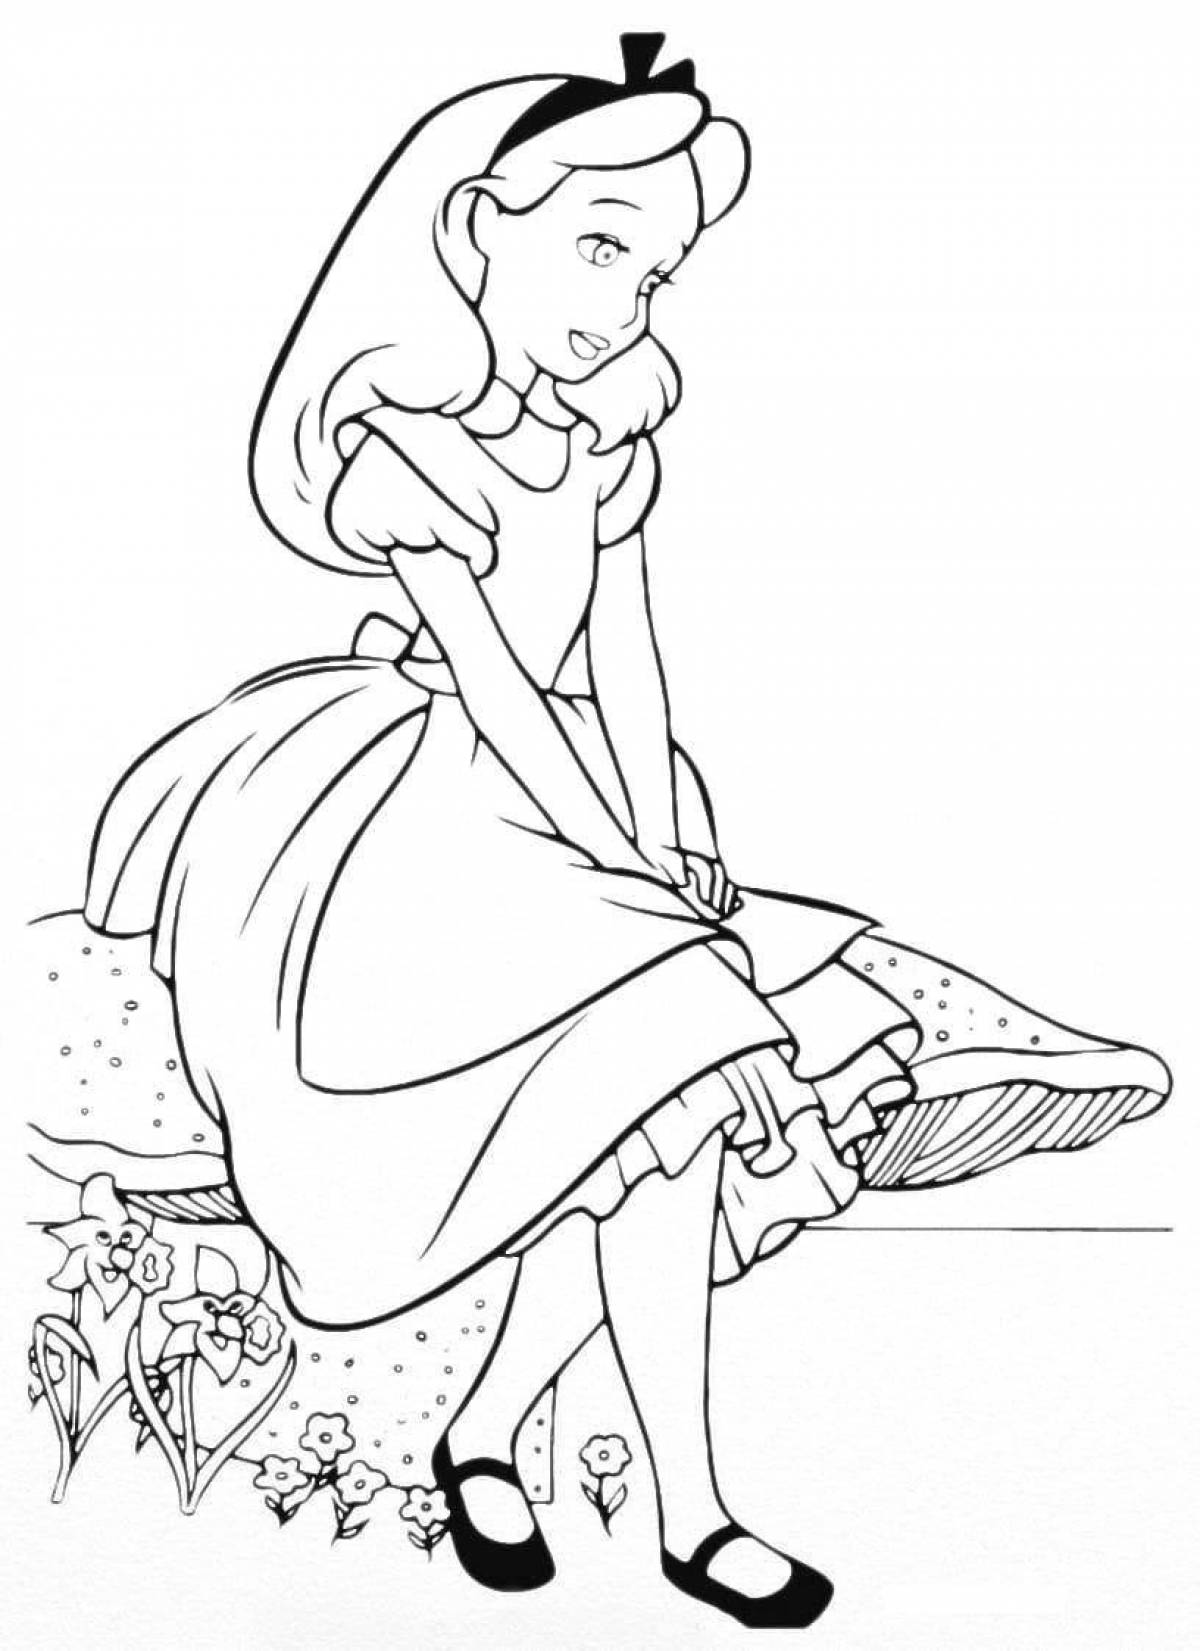 Colorful joy alice coloring page for boys